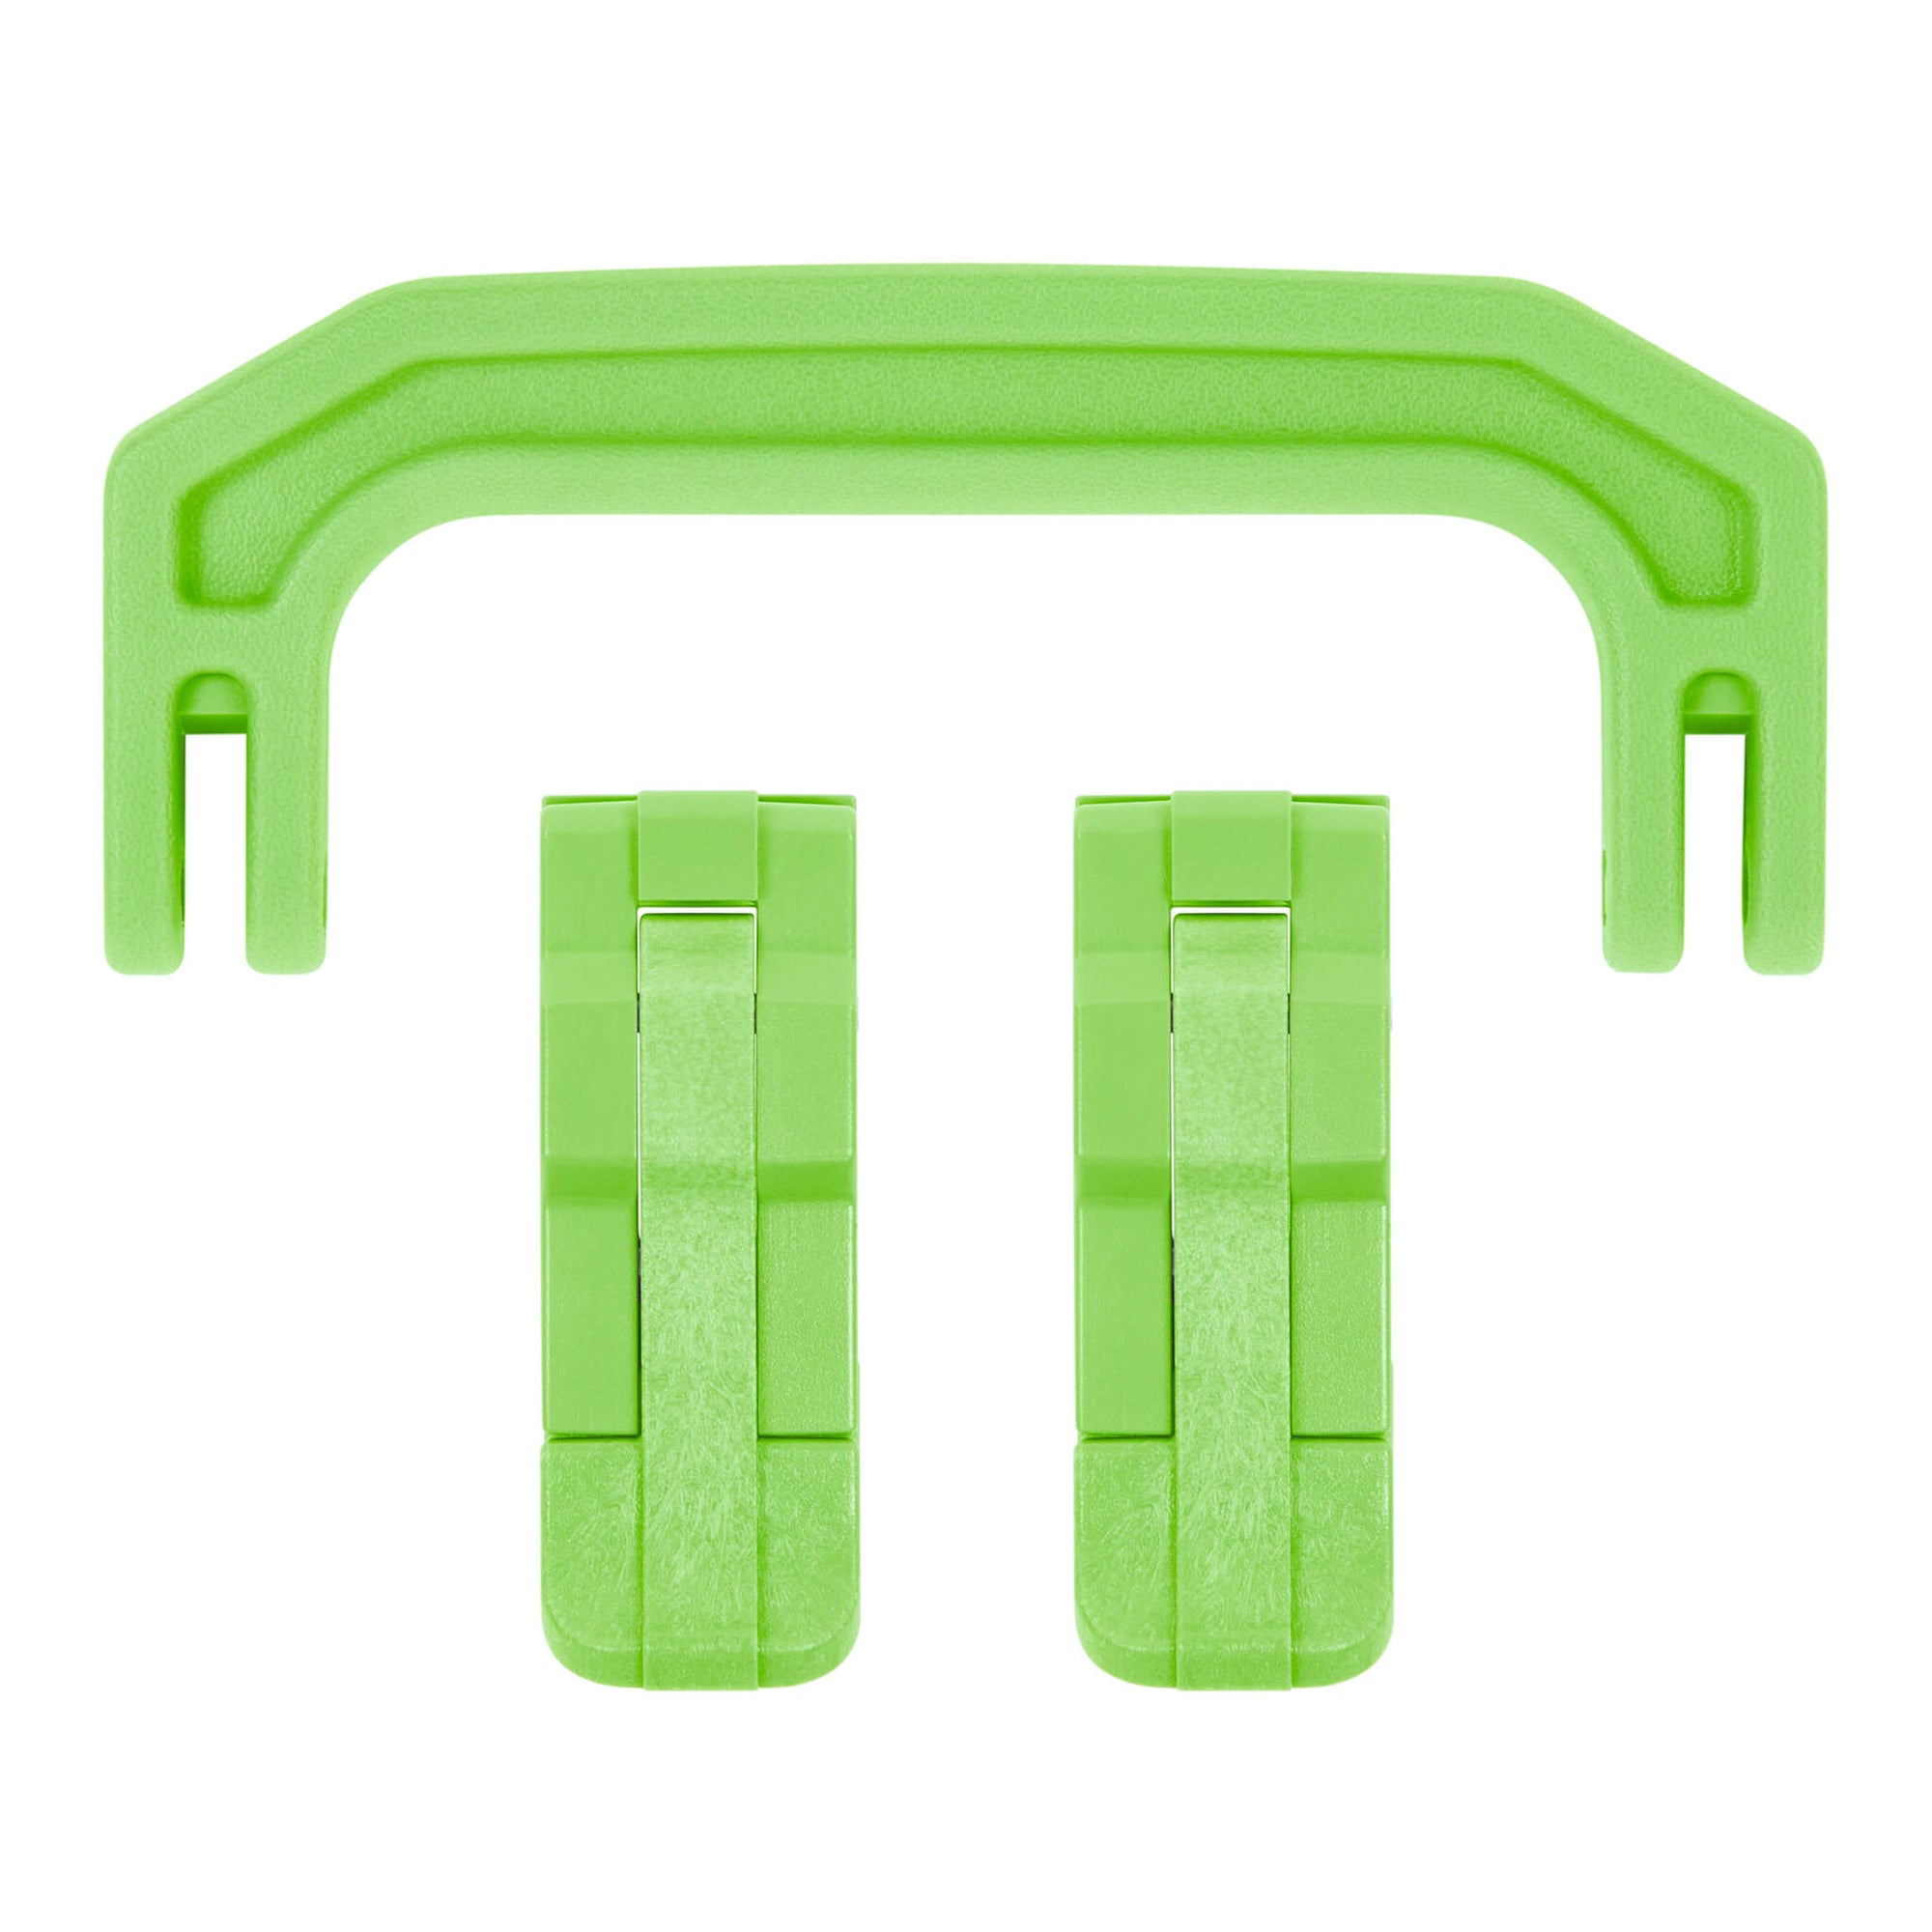 Pelican 1170 Replacement Handle & Latches, Lime Green (Set of 1 Handle, 2 Latches) ColorCase 